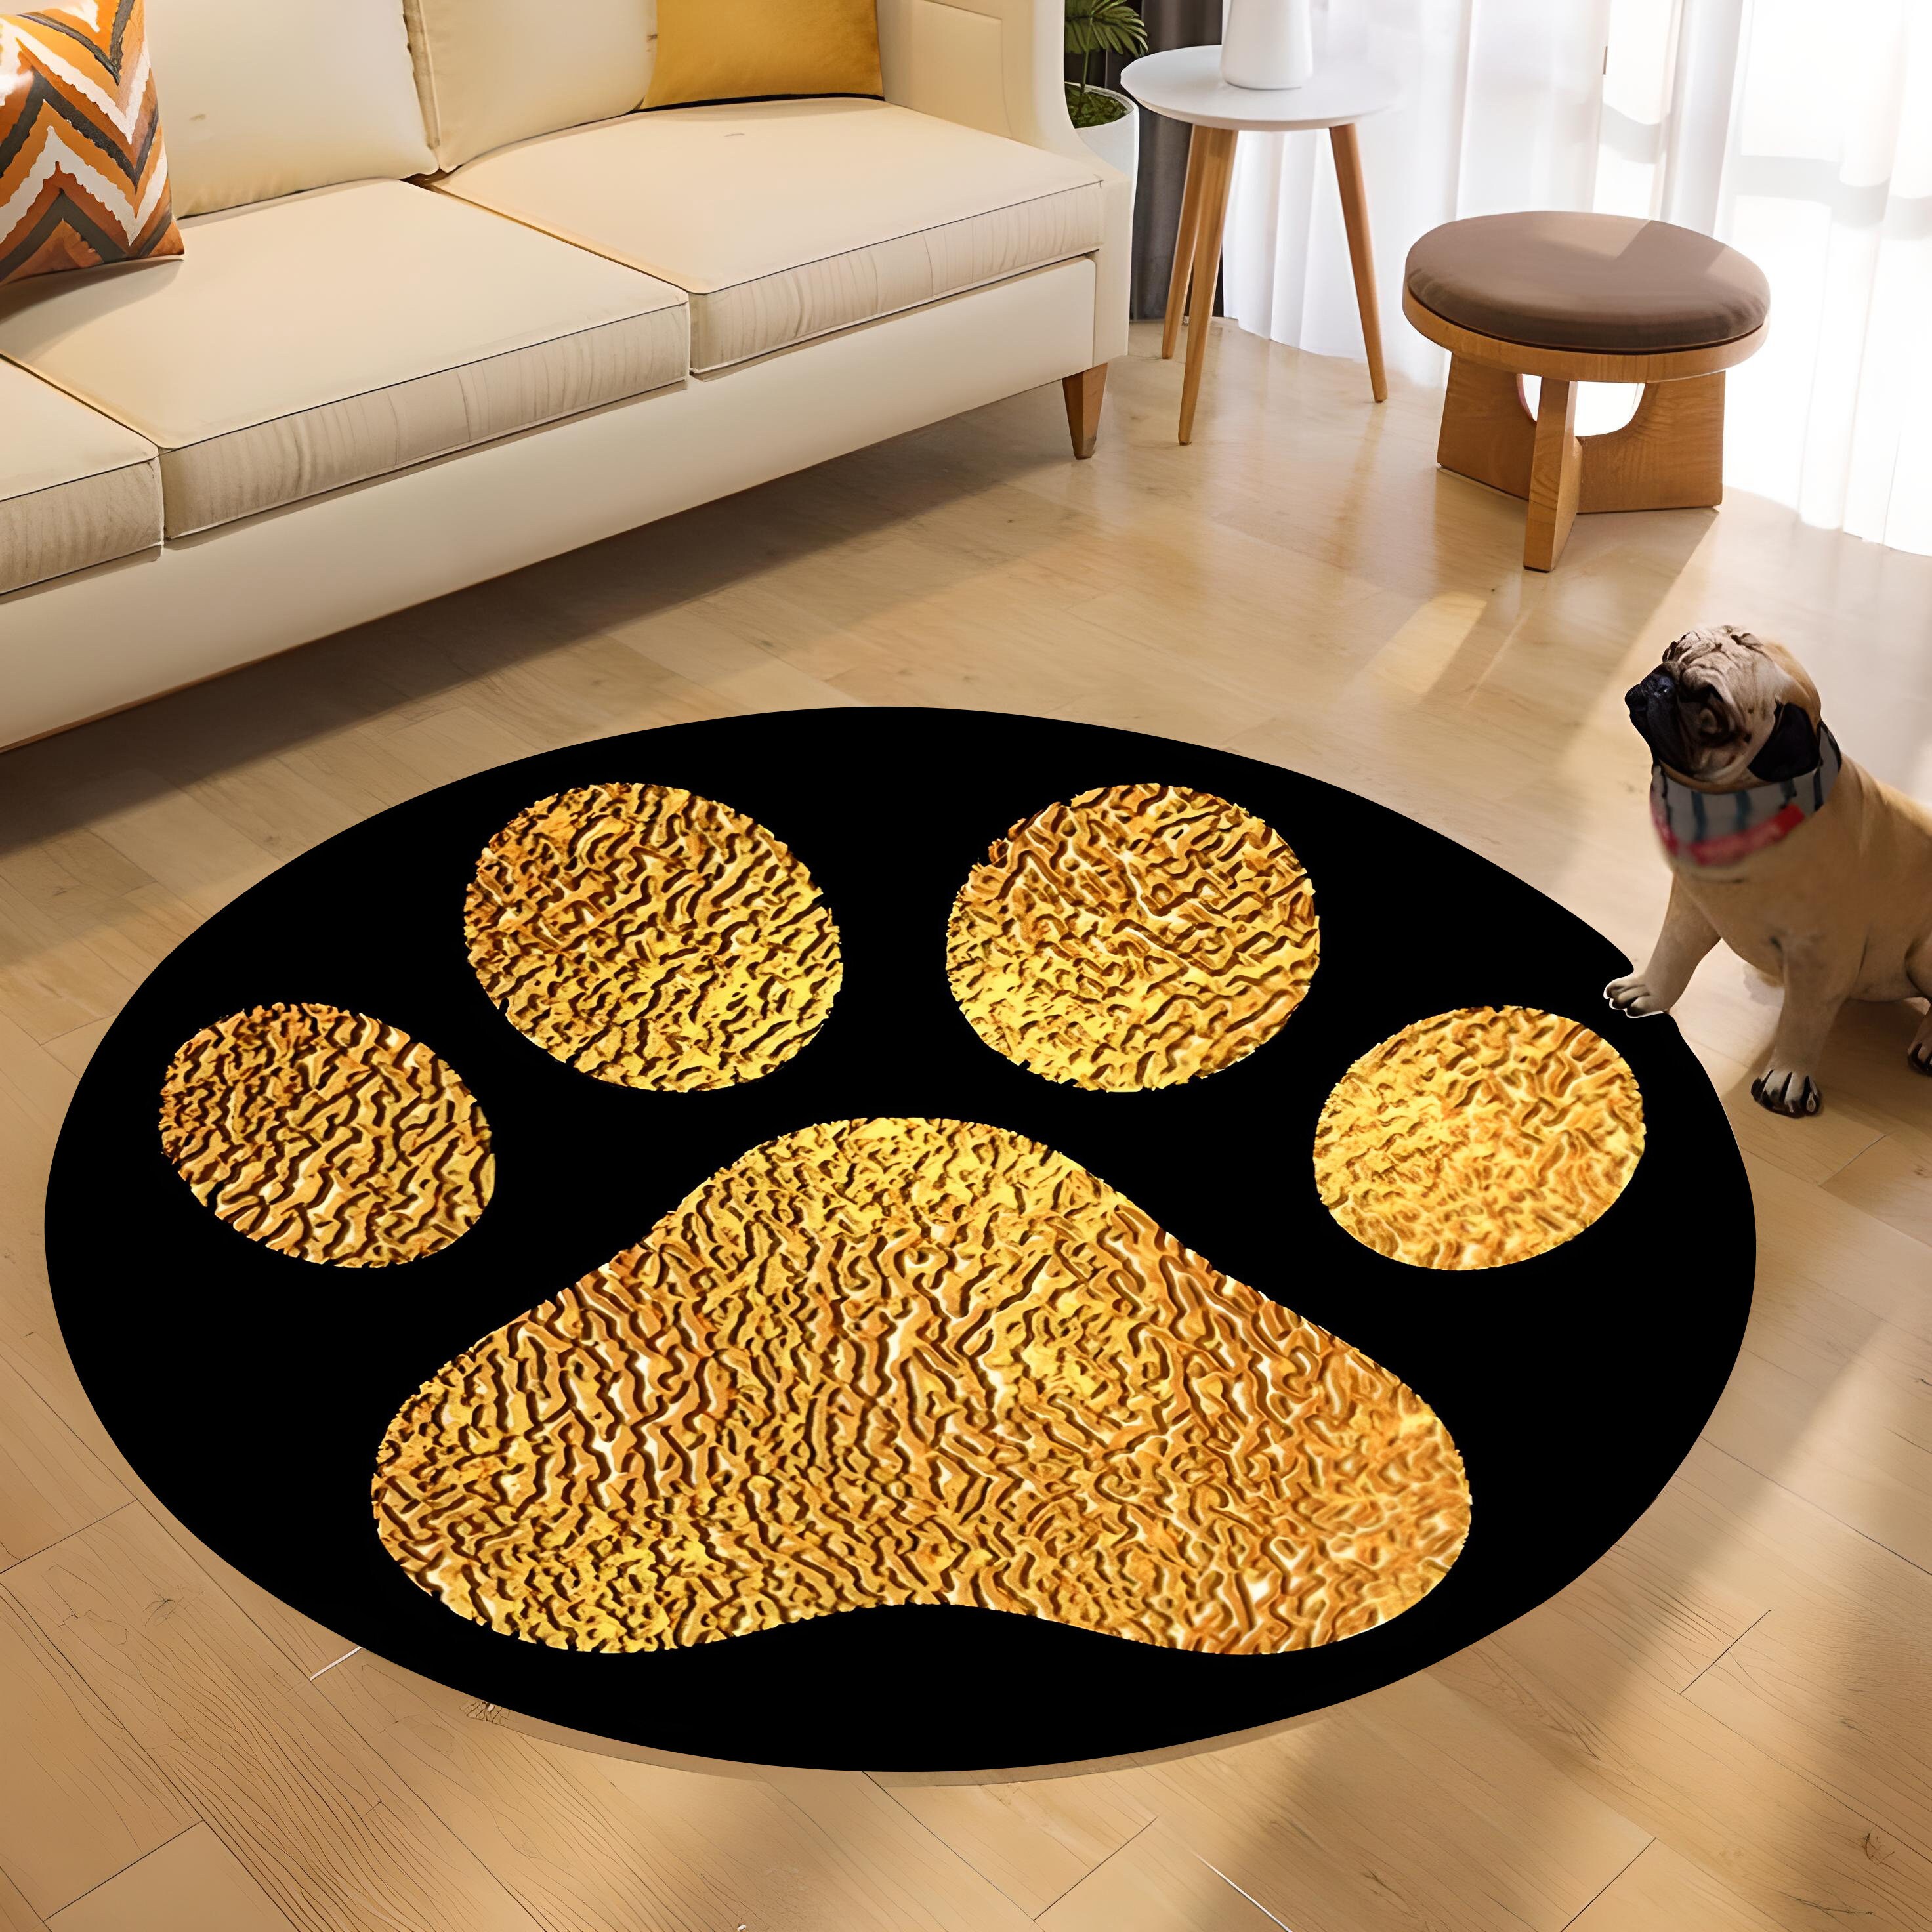 Tufted Handmade Animal Paw Print Rug Preorder 0.5-5 Feet, Pet Gift, Pet  Lover Gifts, Personalized Gift, Pet Decor, Rug, Carpet, Handmade 